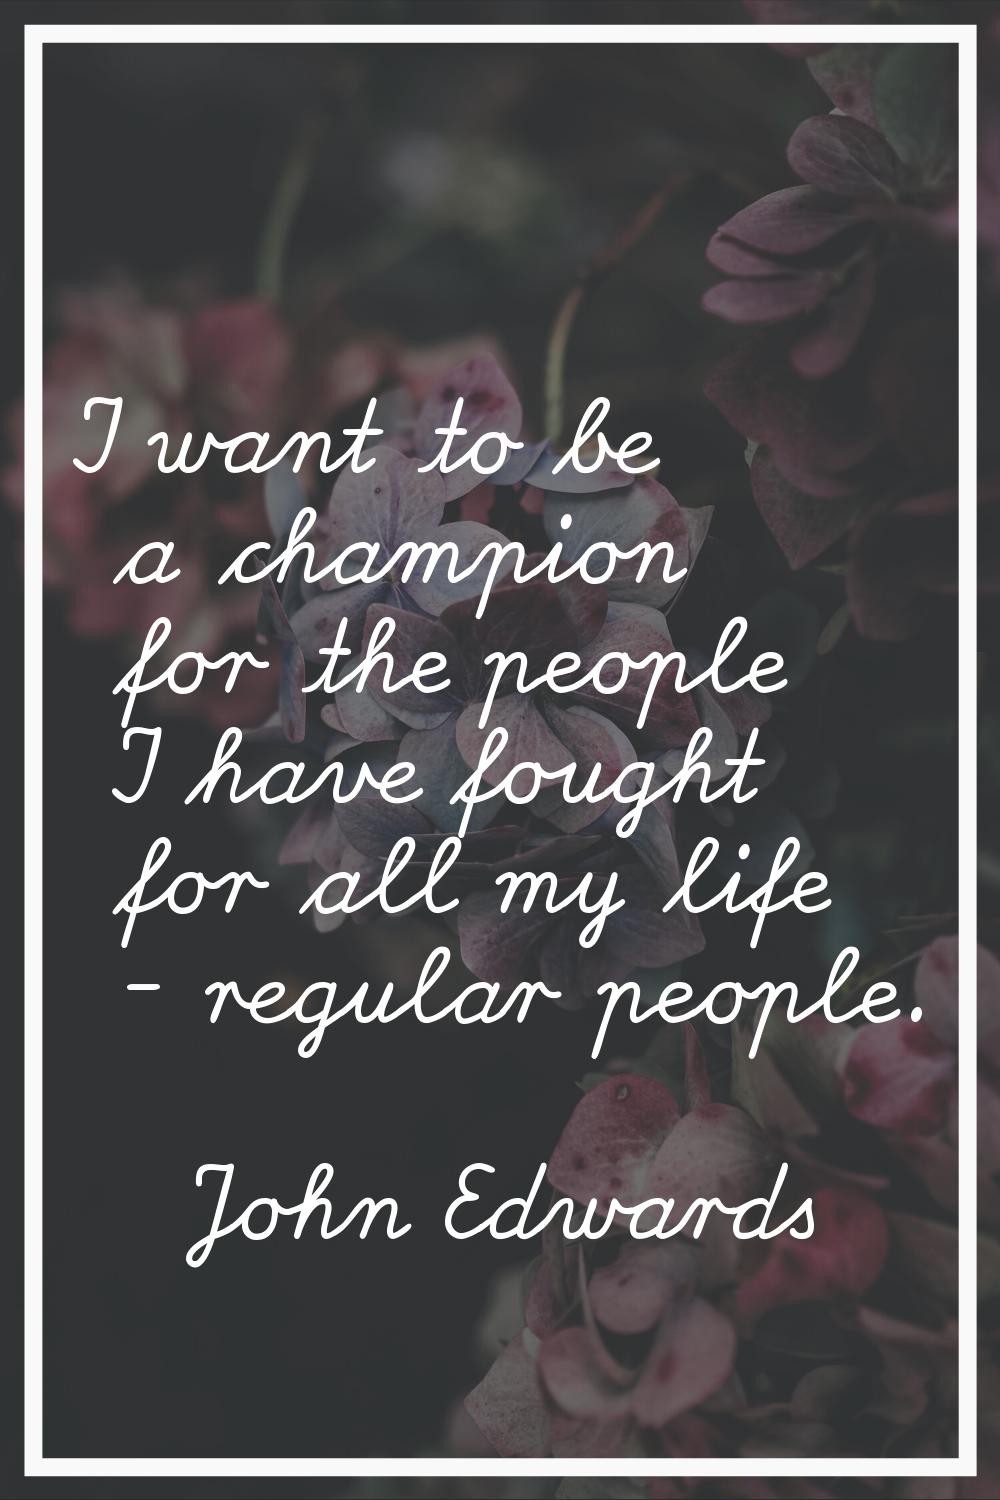 I want to be a champion for the people I have fought for all my life - regular people.